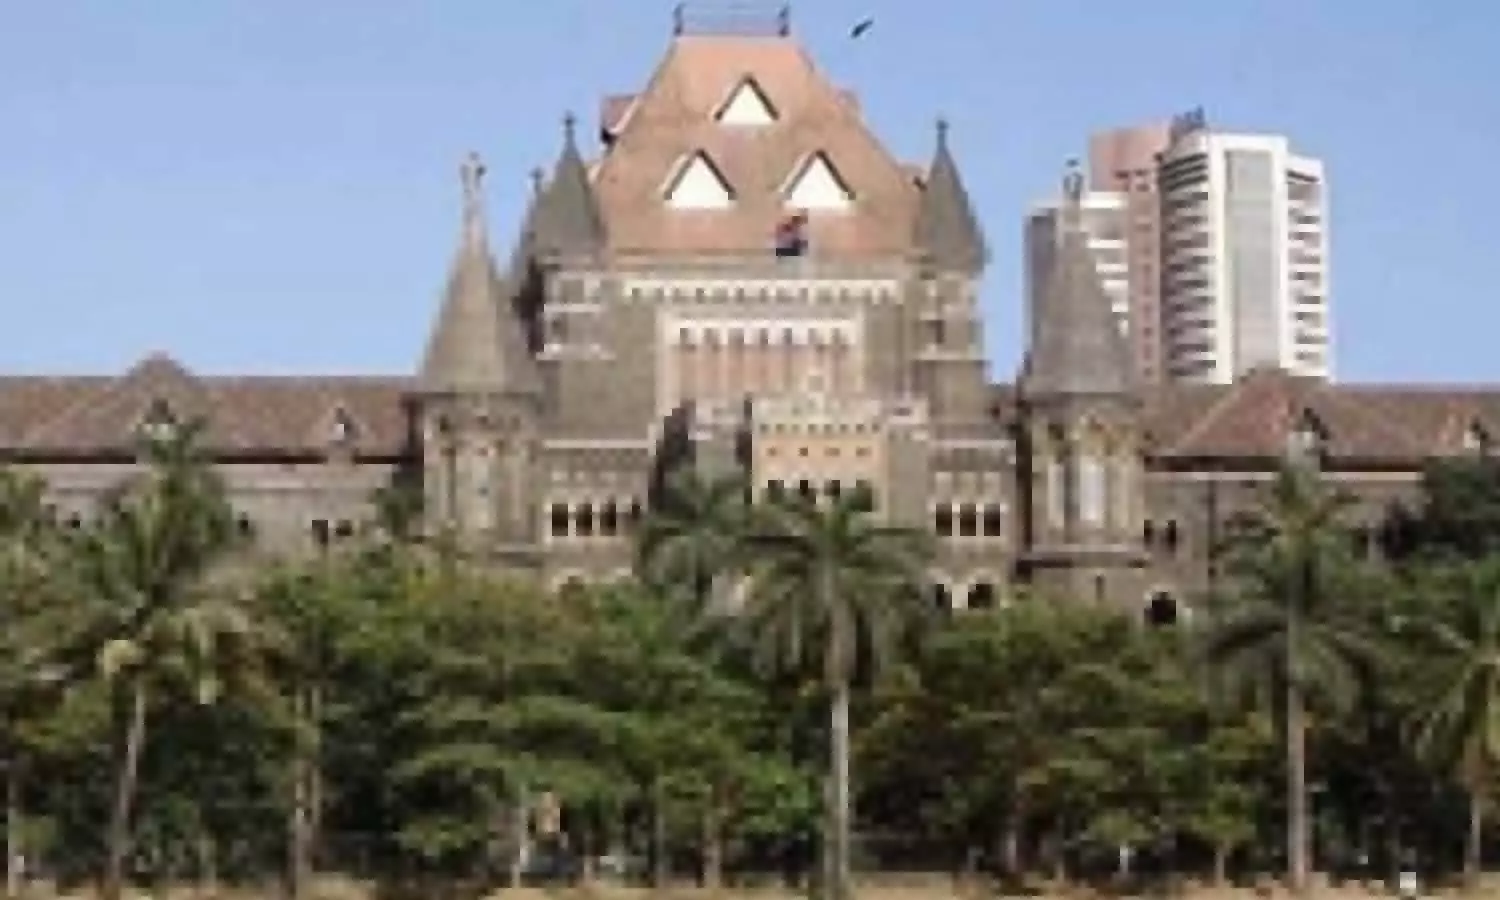 Bombay High Court said calling husband an alcoholic and an adulterer was cruelty and justified grounds for divorce